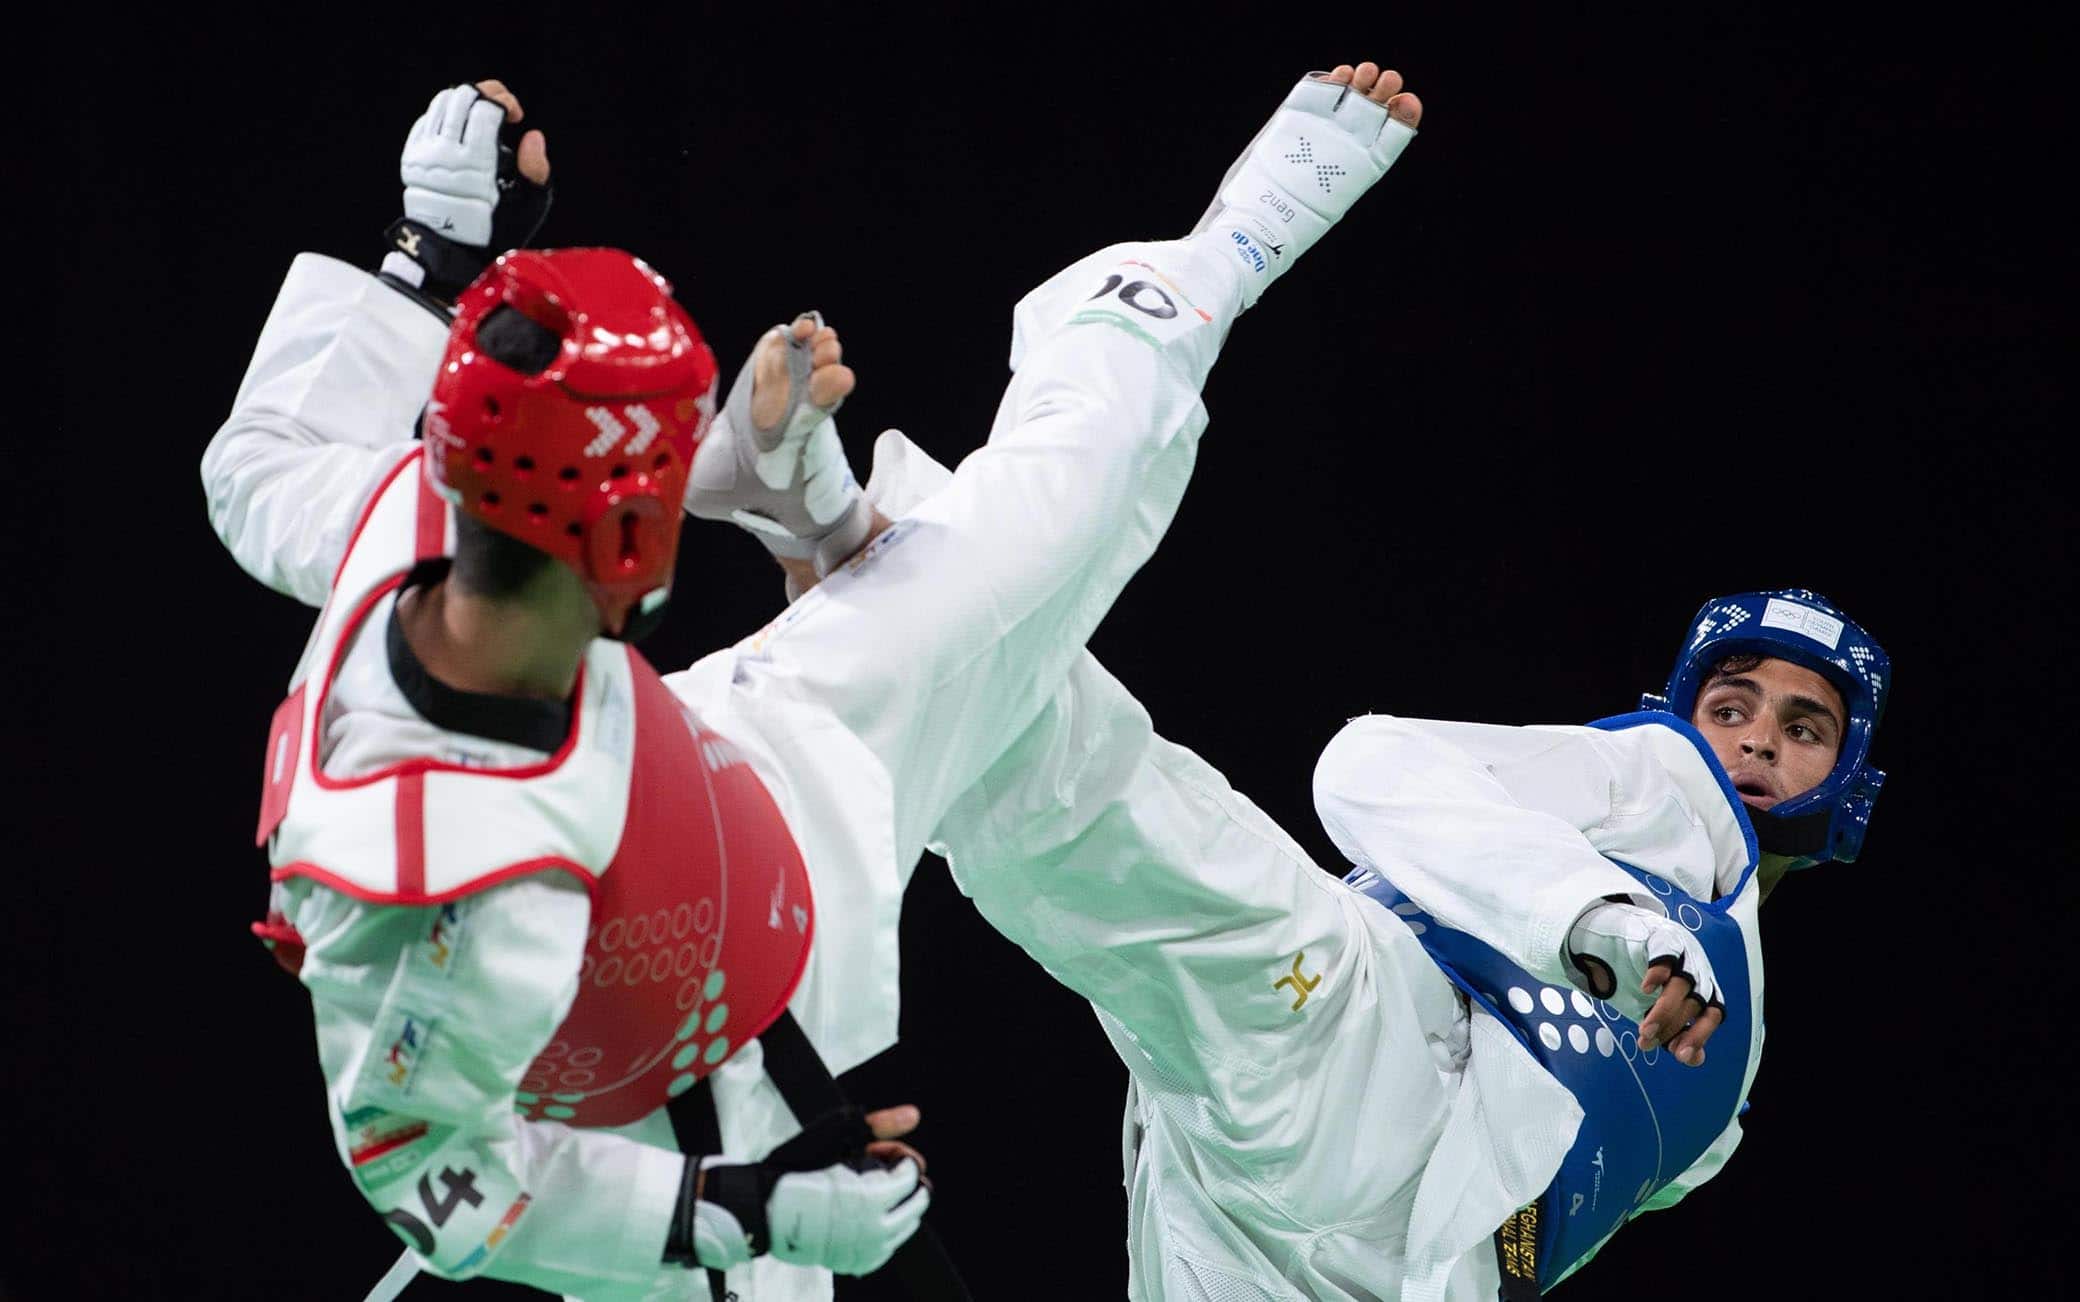 epa07087095 Nisar Ahmad Abdul Rahimzai of Afghanistan (R) and Mohammadali Khosravi of Iran (L) compete in the Taekwondo Mens 73kg Semi-final in the Oceania Pavilion, Youth Olympic Parkduring the Youth Olympic Games, Buenos Aires, Argentina, 11 October 2018.  EPA/Lukas Schulze  for OIS/IOC HANDOUT  HANDOUT EDITORIAL USE ONLY/NO SALES